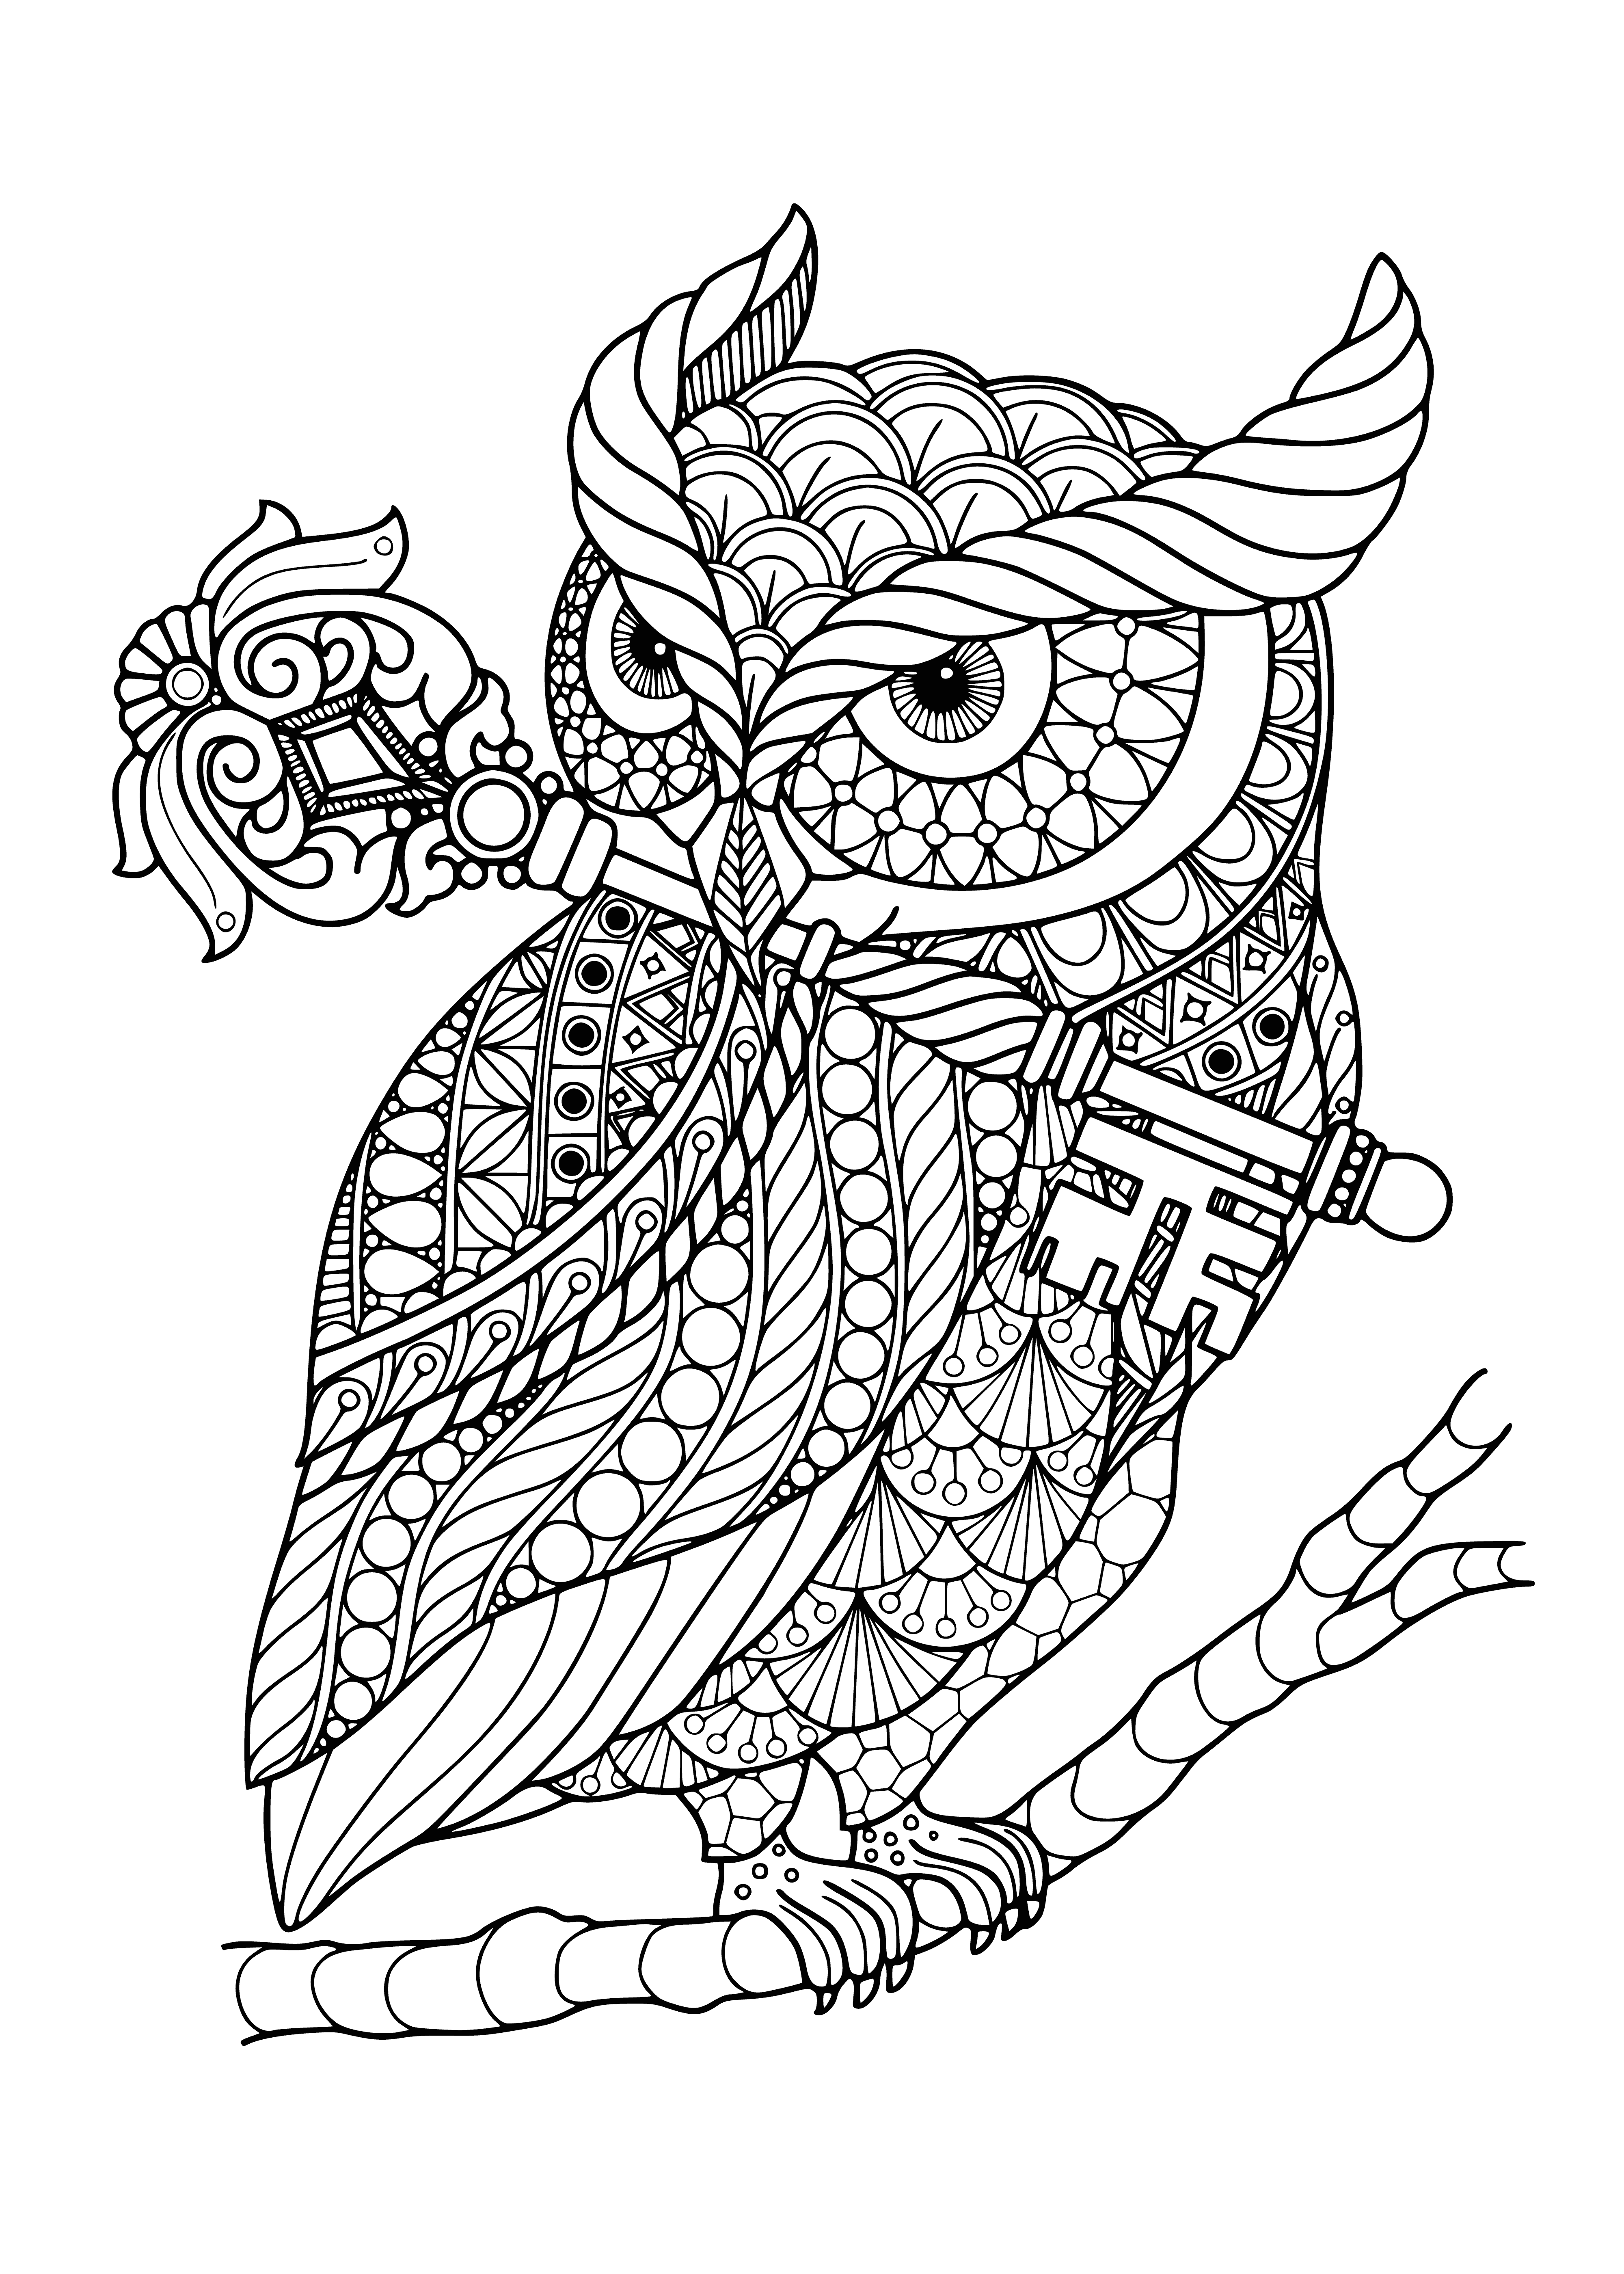 coloring page: Coloring page of wise owl perched atop books, holding a key, providing a calm space for coloring. #coloring #inspiration #creativity